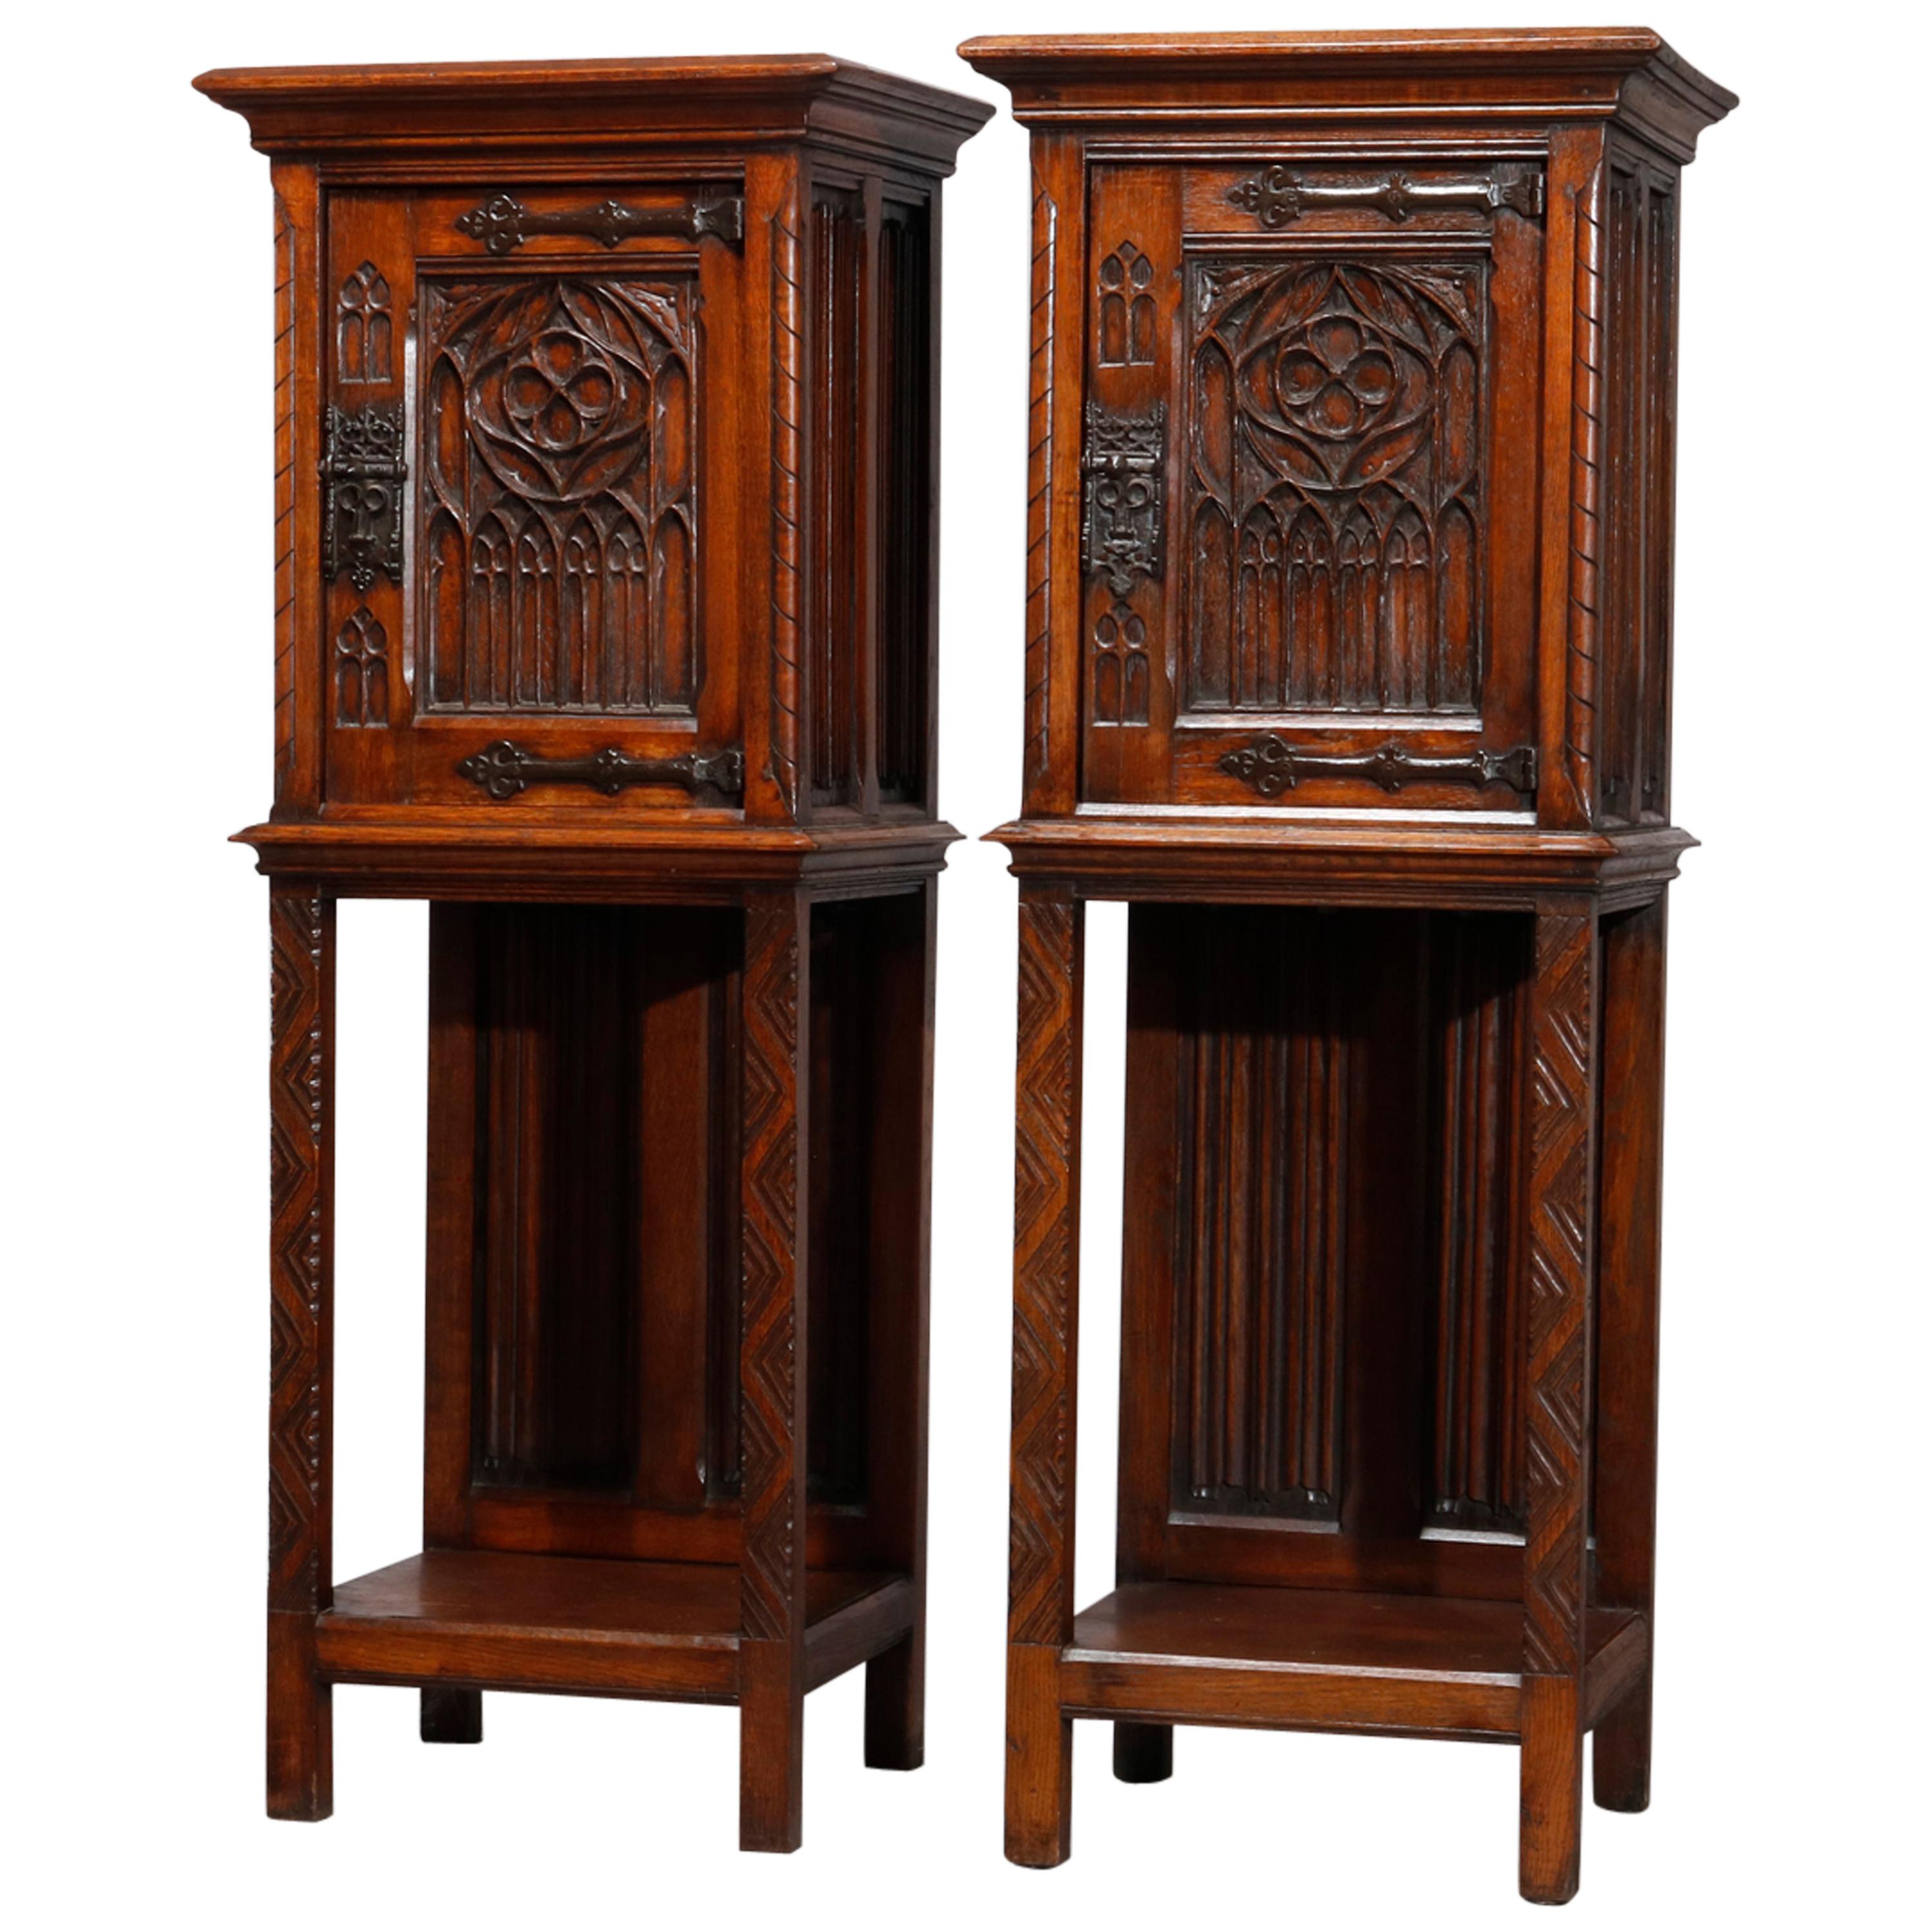 Antique Pair of English Gothic Revival Carved Oak Side Cabinets, circa 1890